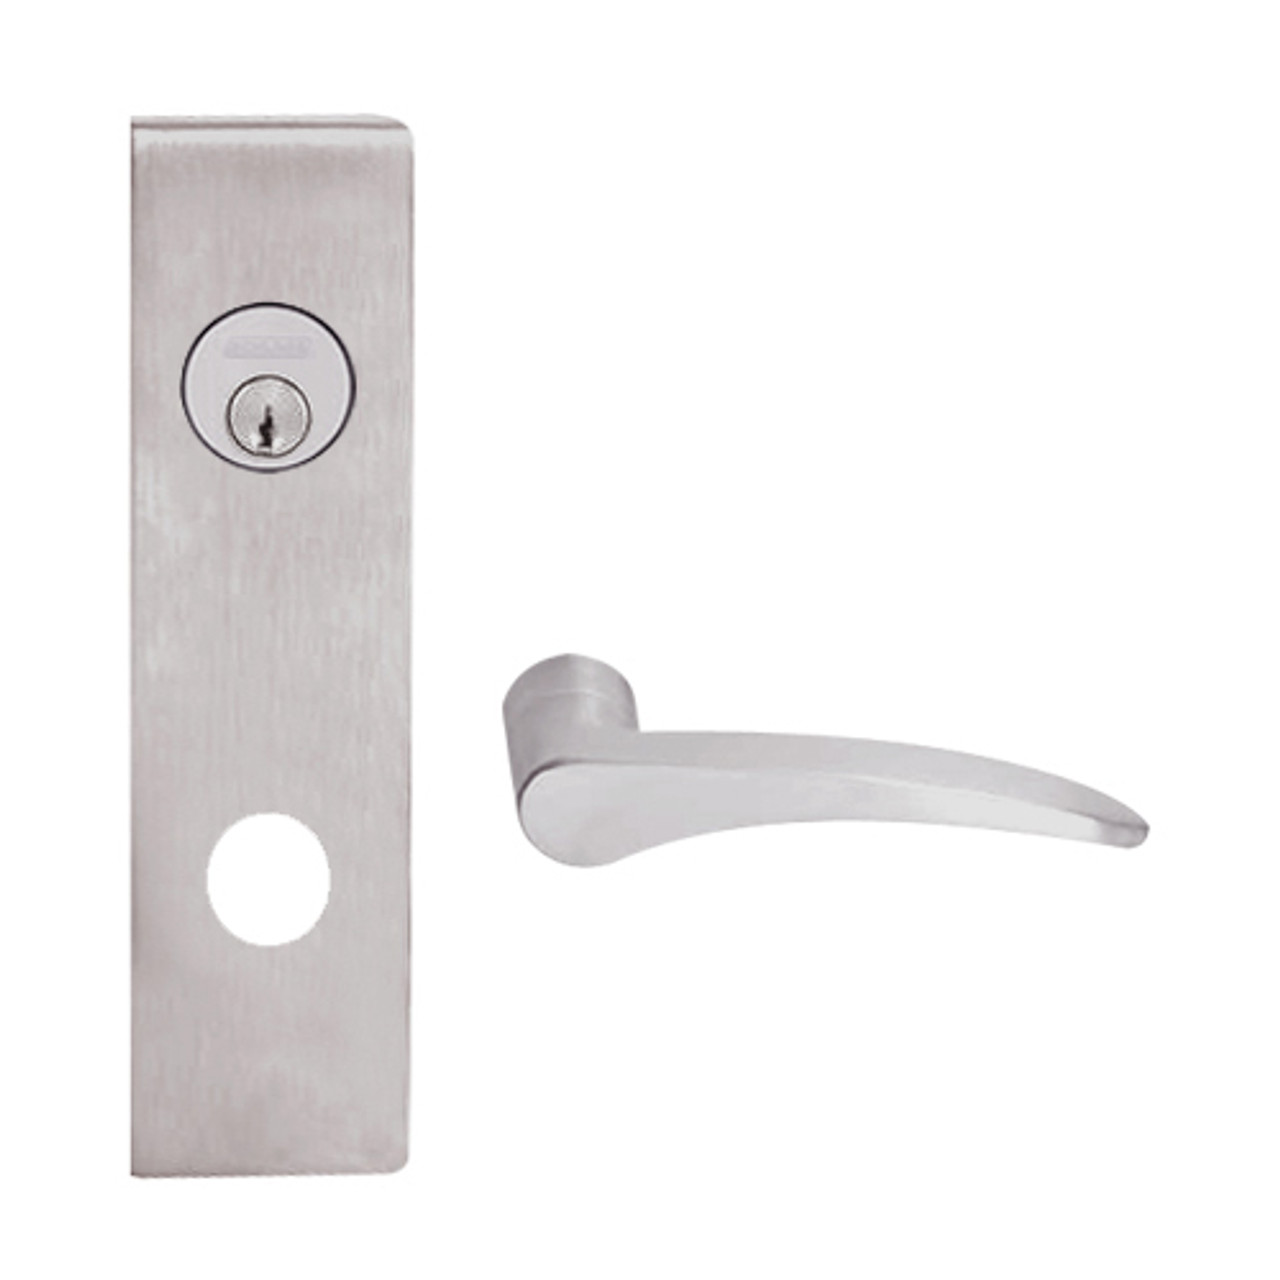 L9026L-12N-630-RH Schlage L Series Less Cylinder Exit Lock with Cylinder Commercial Mortise Lock with 12 Cast Lever Design in Satin Stainless Steel